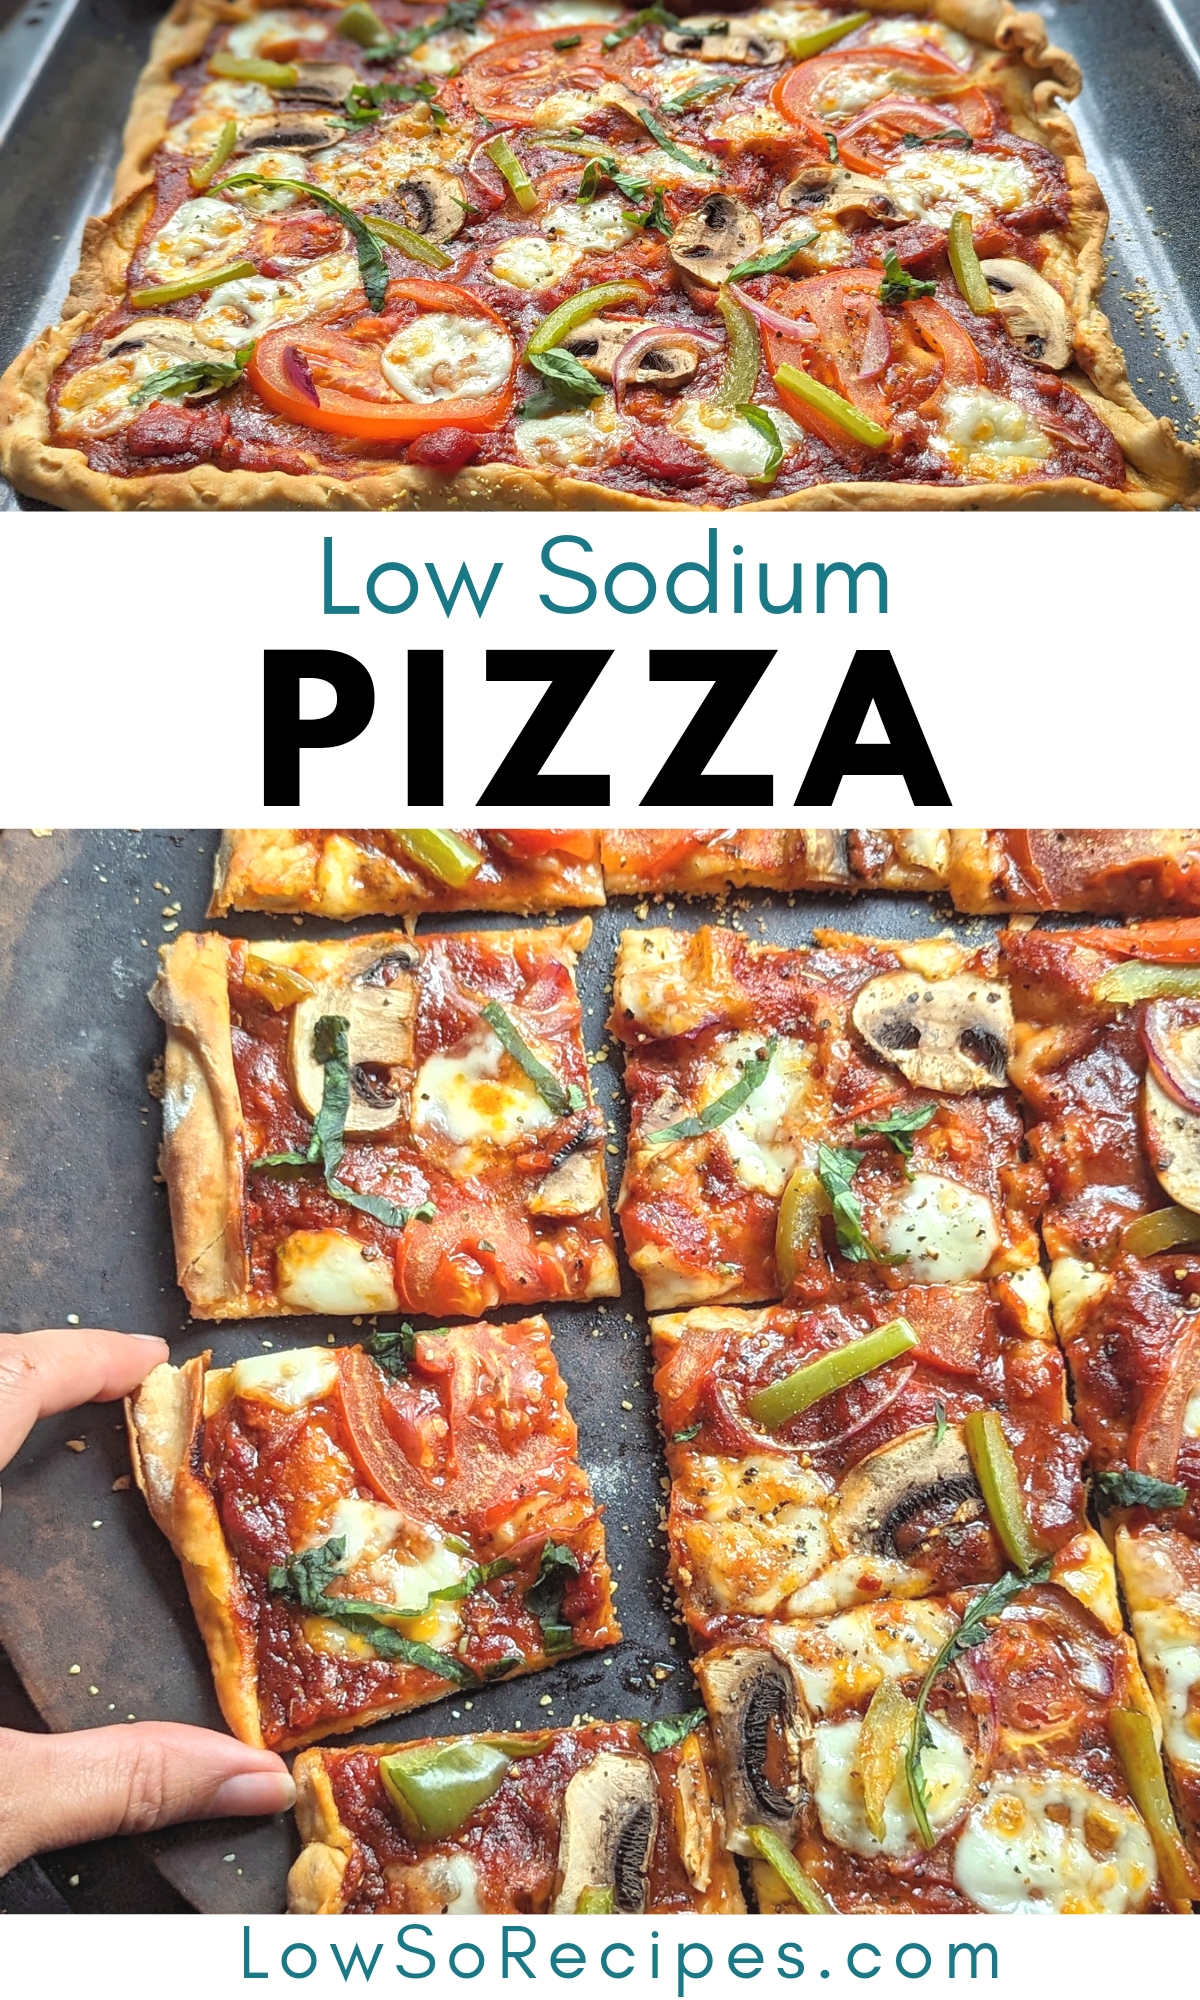 low sodium pizza recipe with vegetables and fresh mozzarella salt free sauce and dough